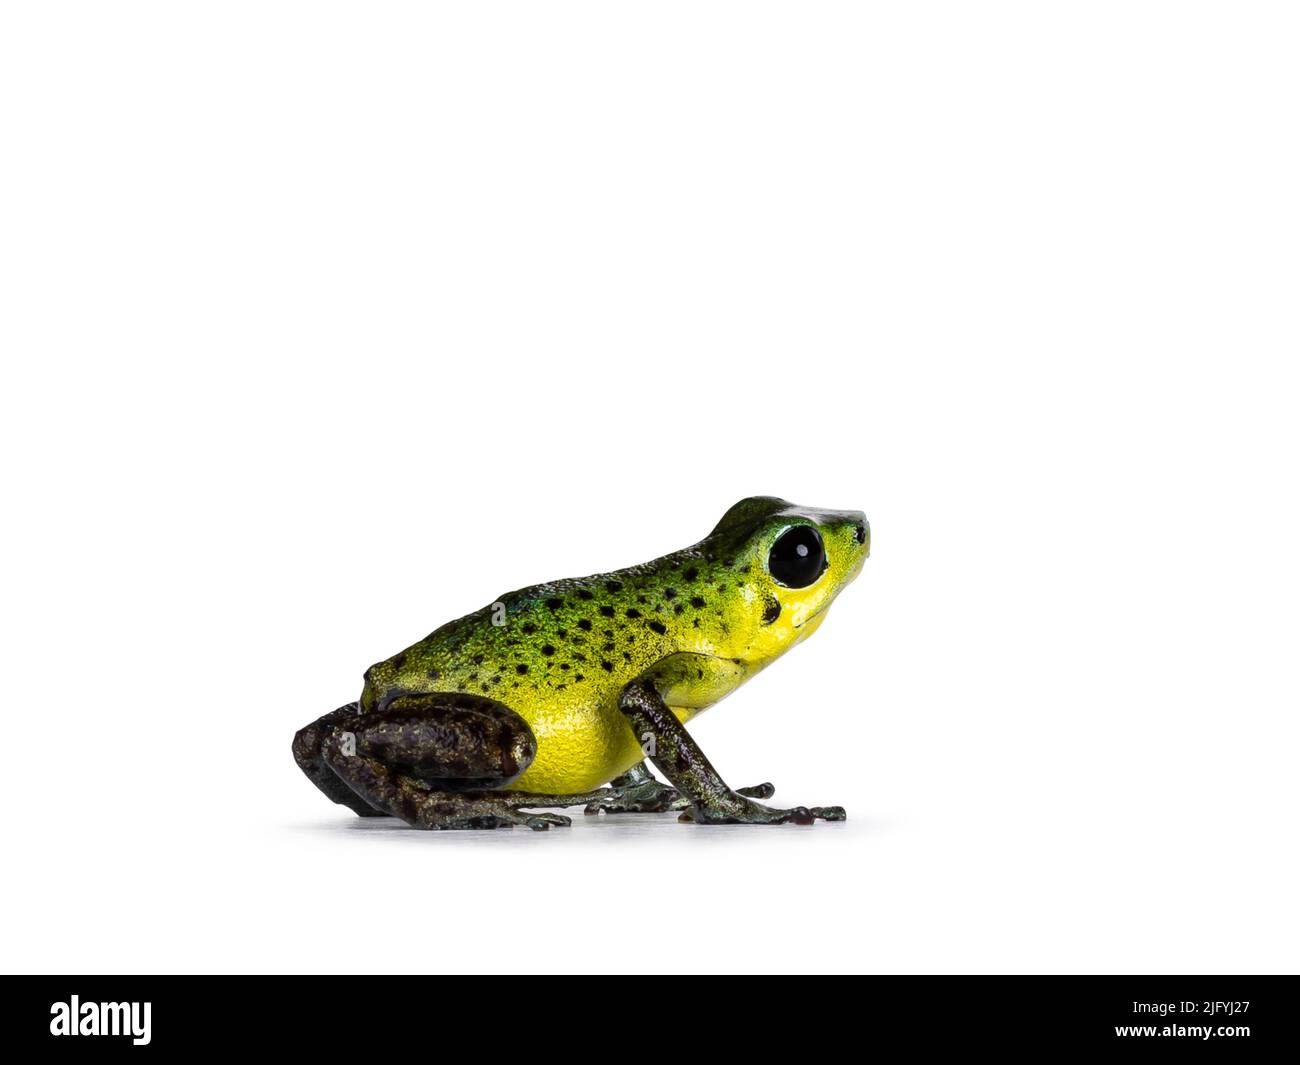 Vibrant Oophaga pumilio Punta Laurent frog standing side ways. Isolated on a white background. Stock Photo